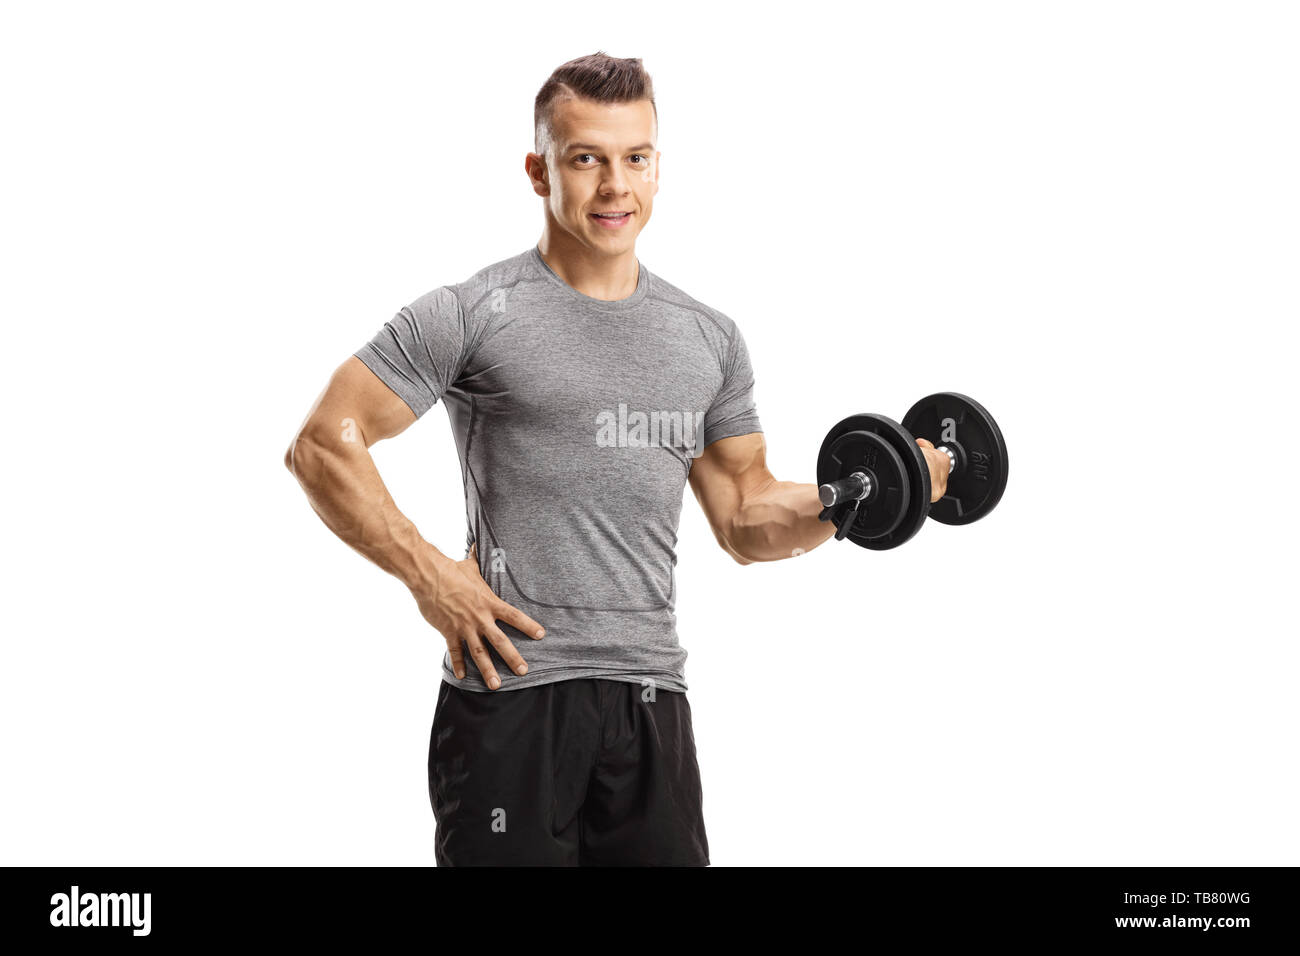 Young man exercising with a dumbbell and looking at the camera isolated on white background Stock Photo